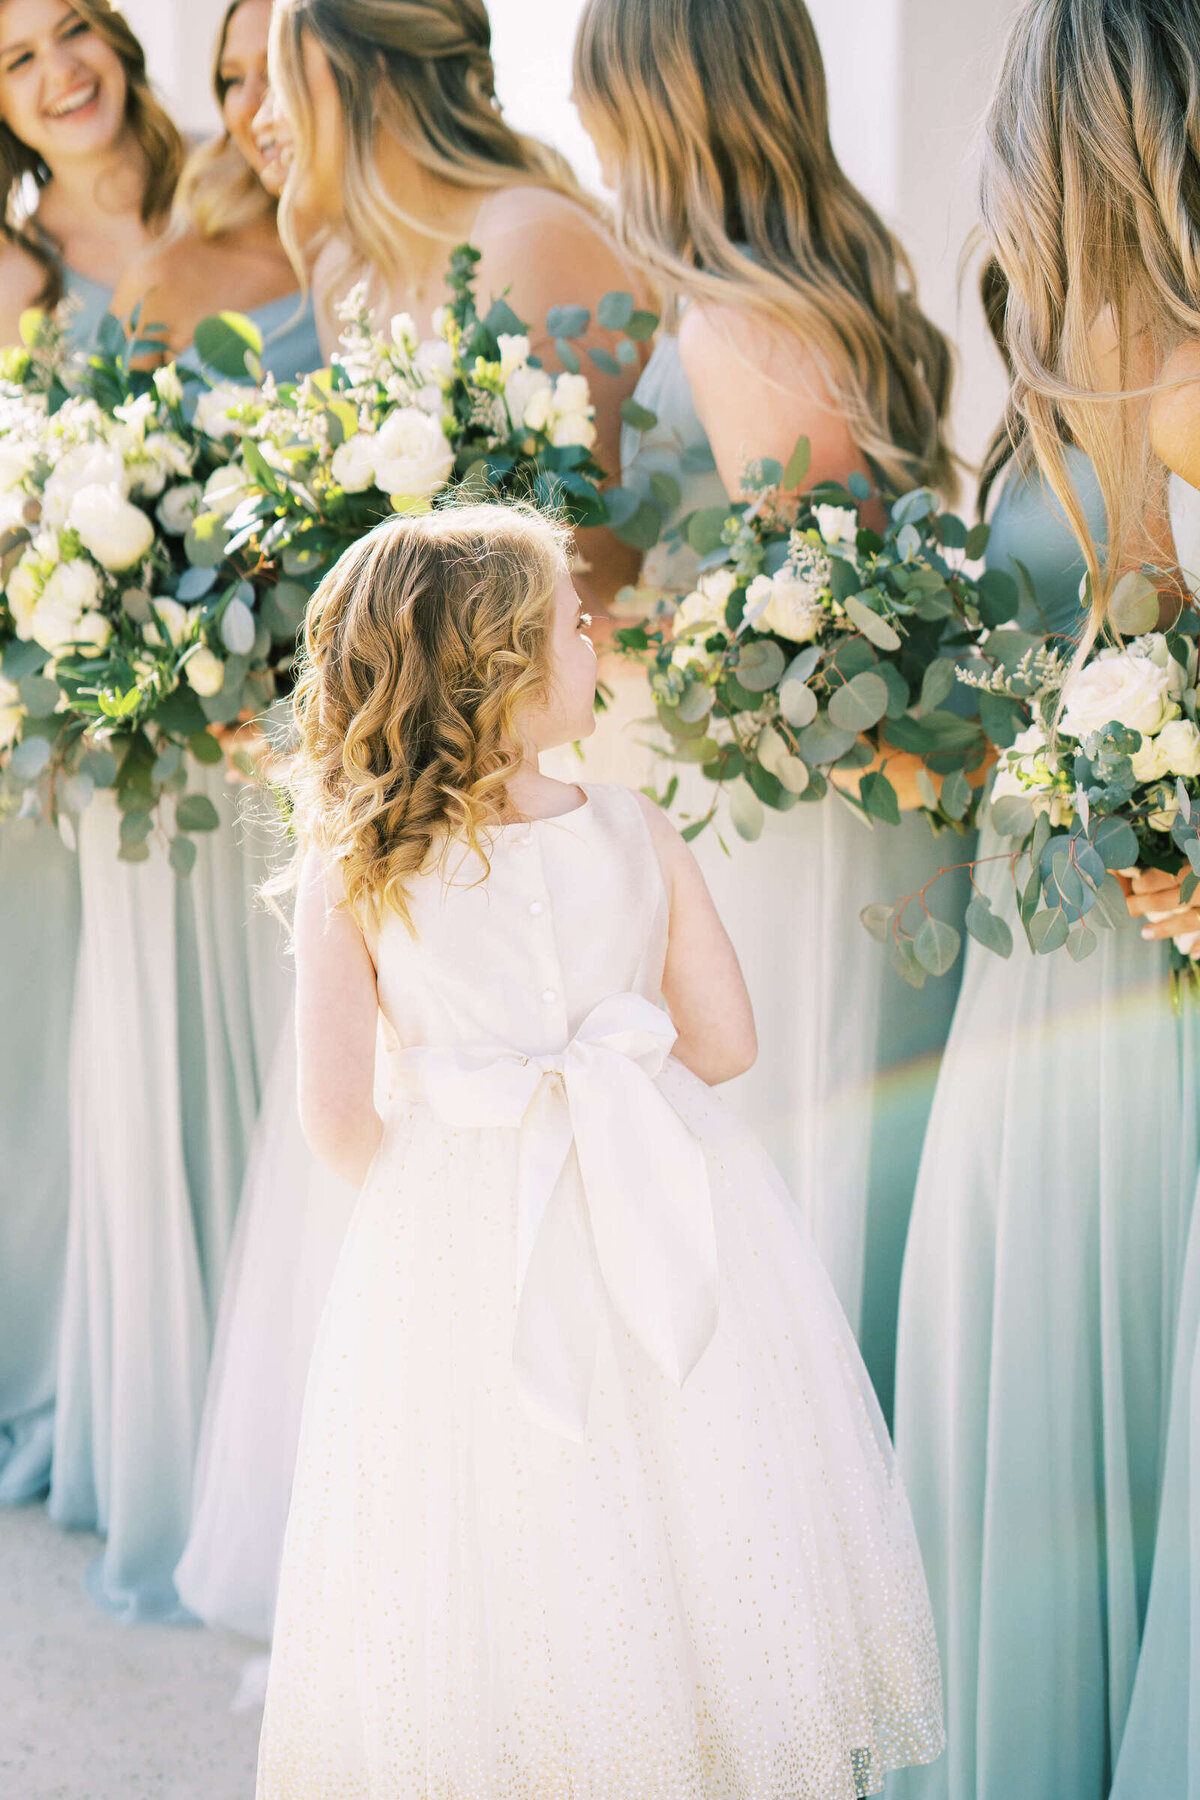 Curly haired flower girl in white flowy dress stands next to bridesmaids